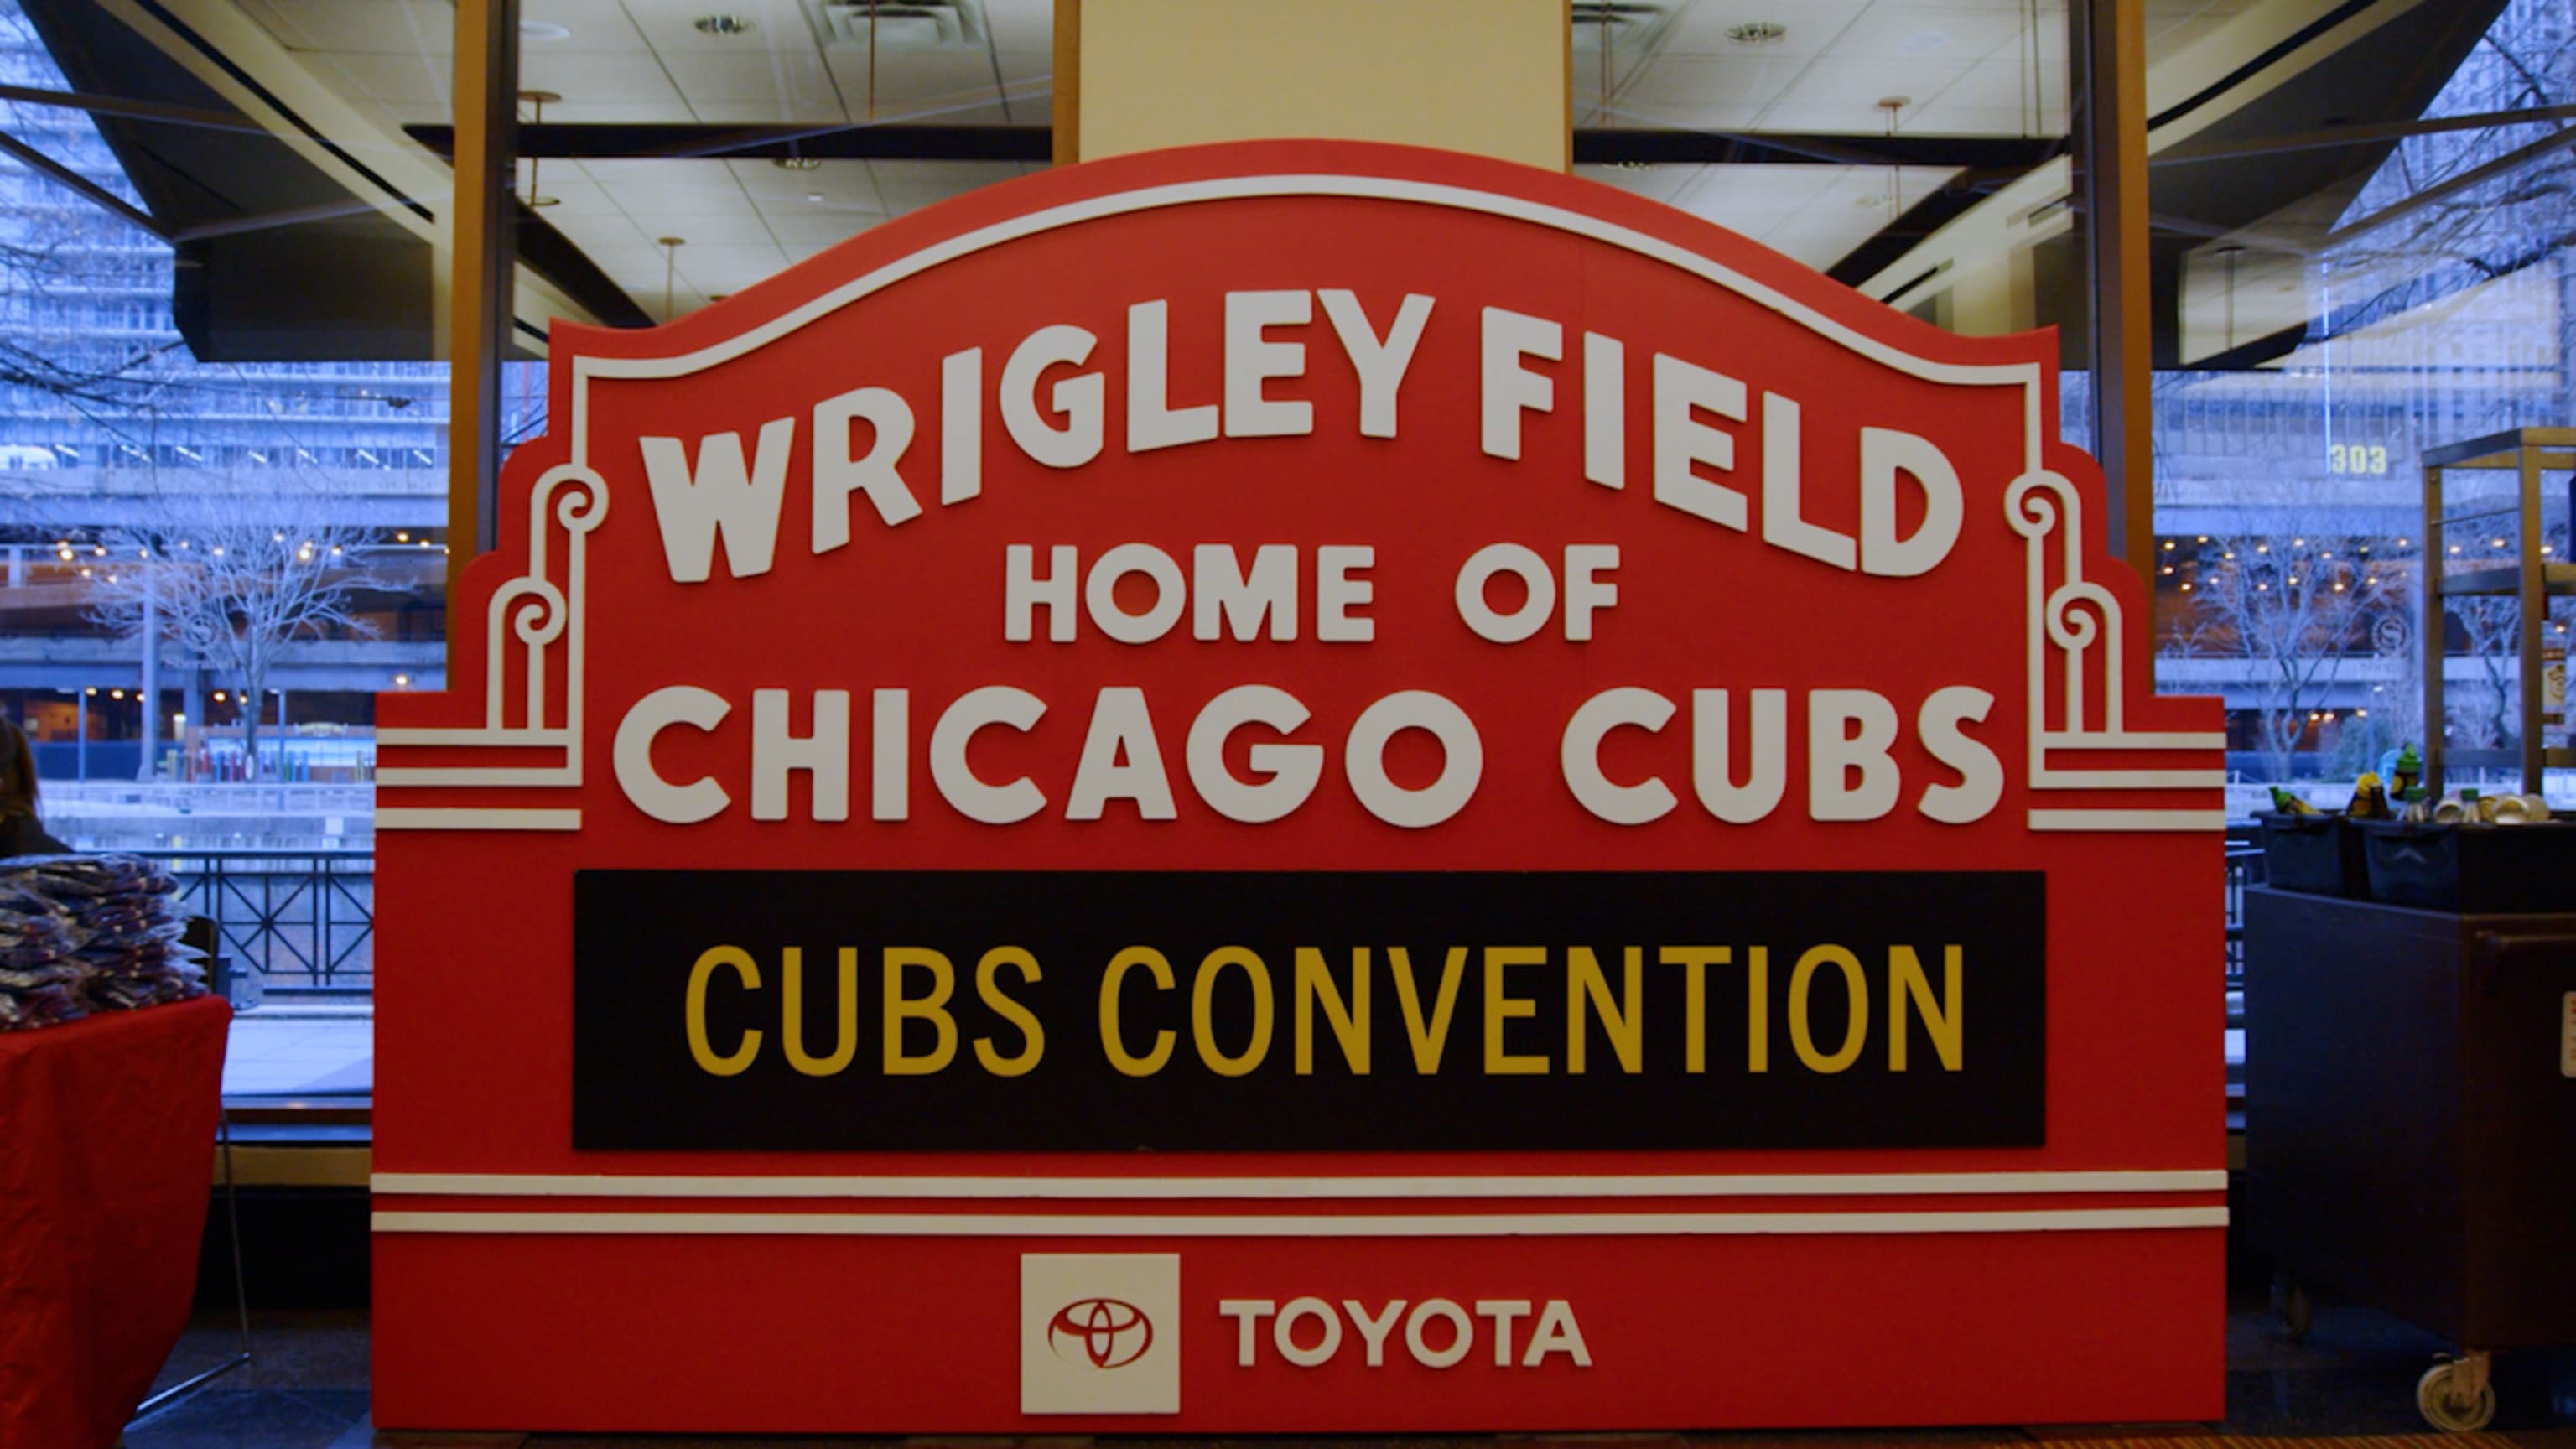 Cubs Convention Chicago Cubs